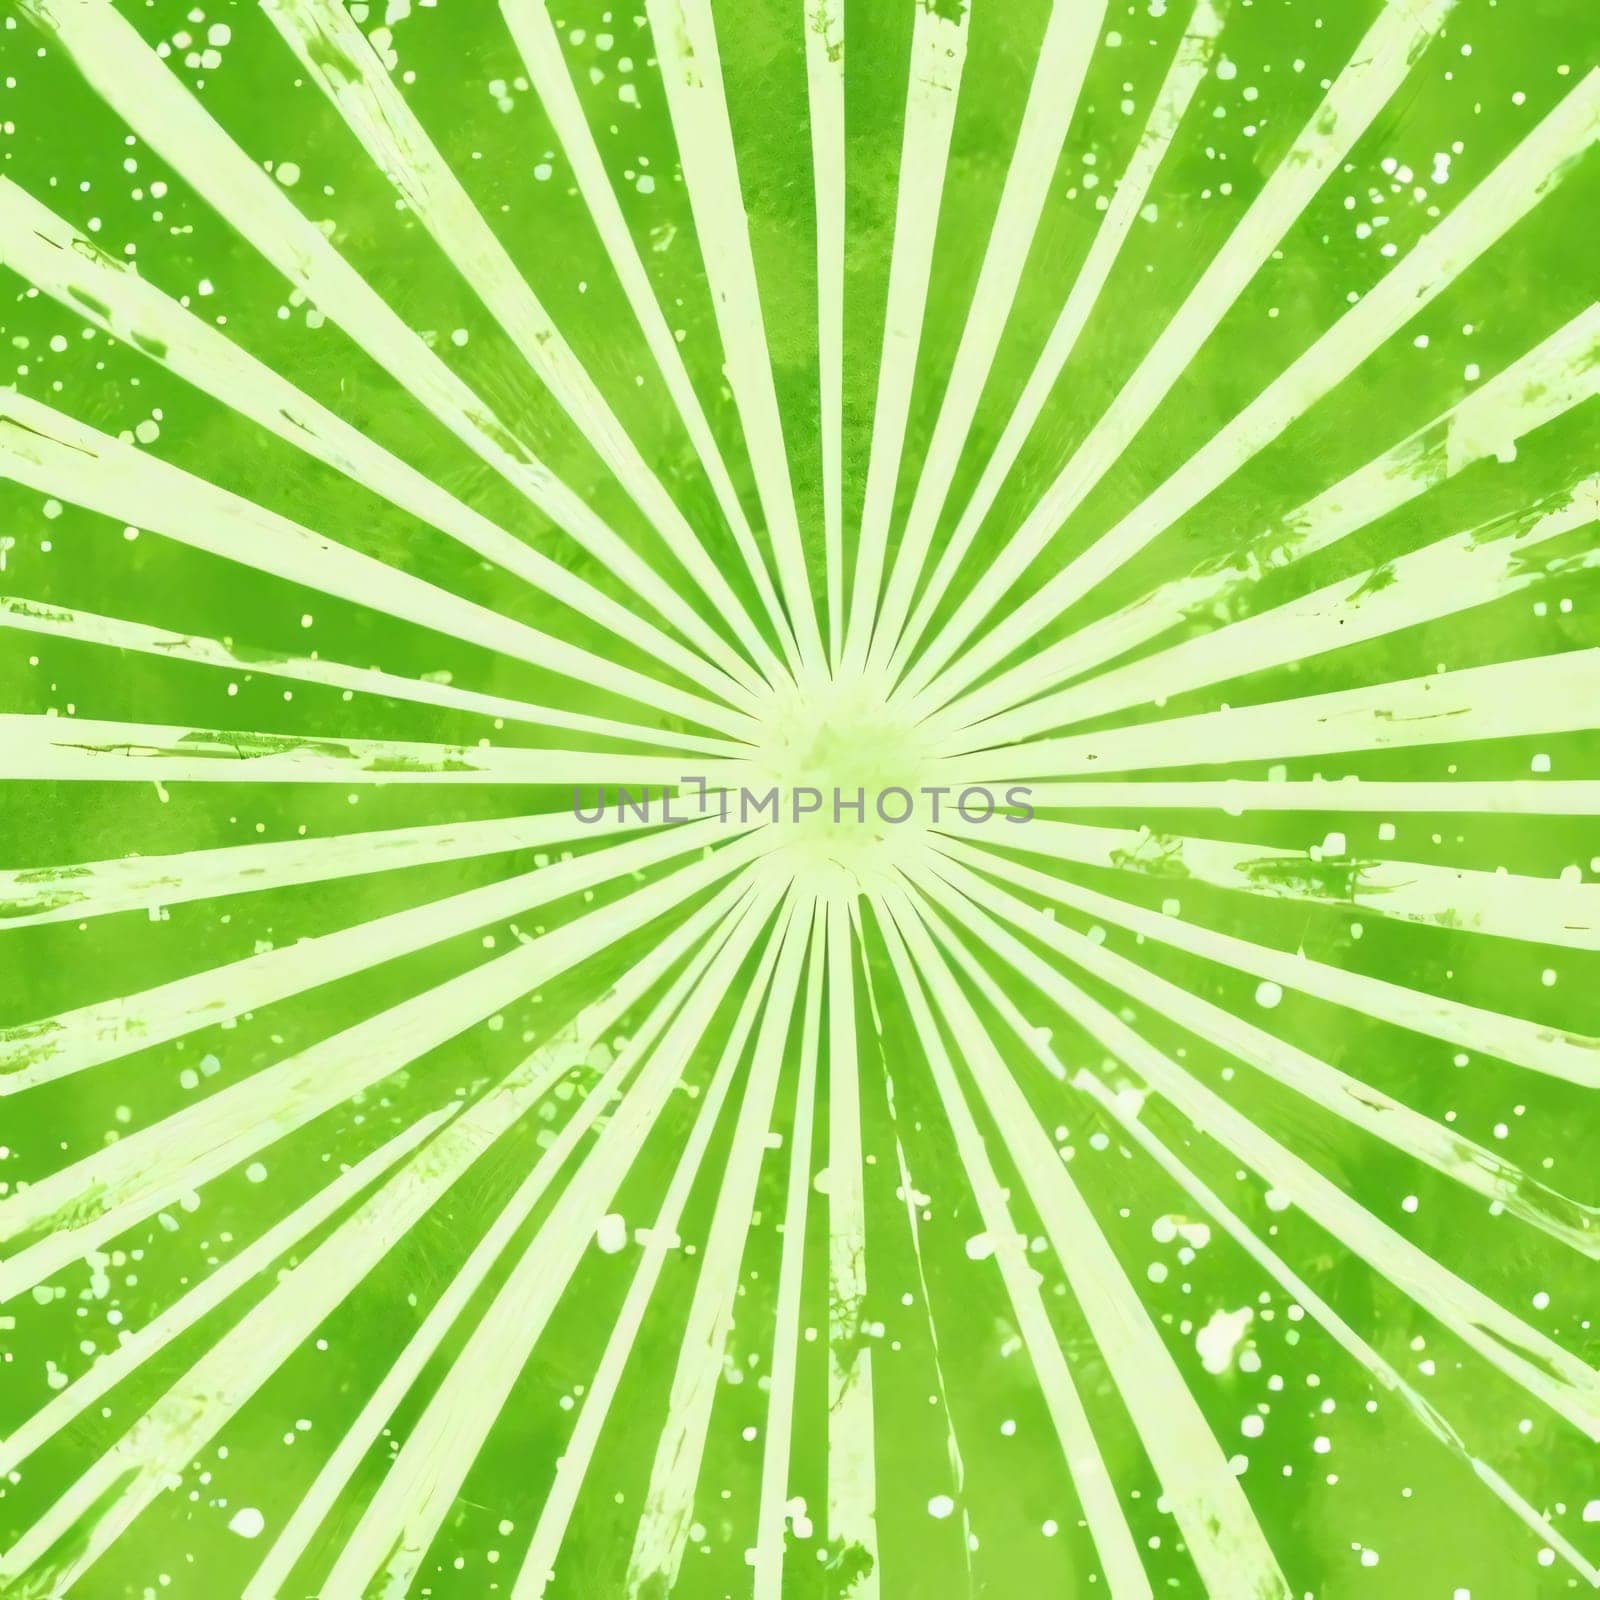 Green grunge background with sun rays. EPS10 vector file included by ThemesS